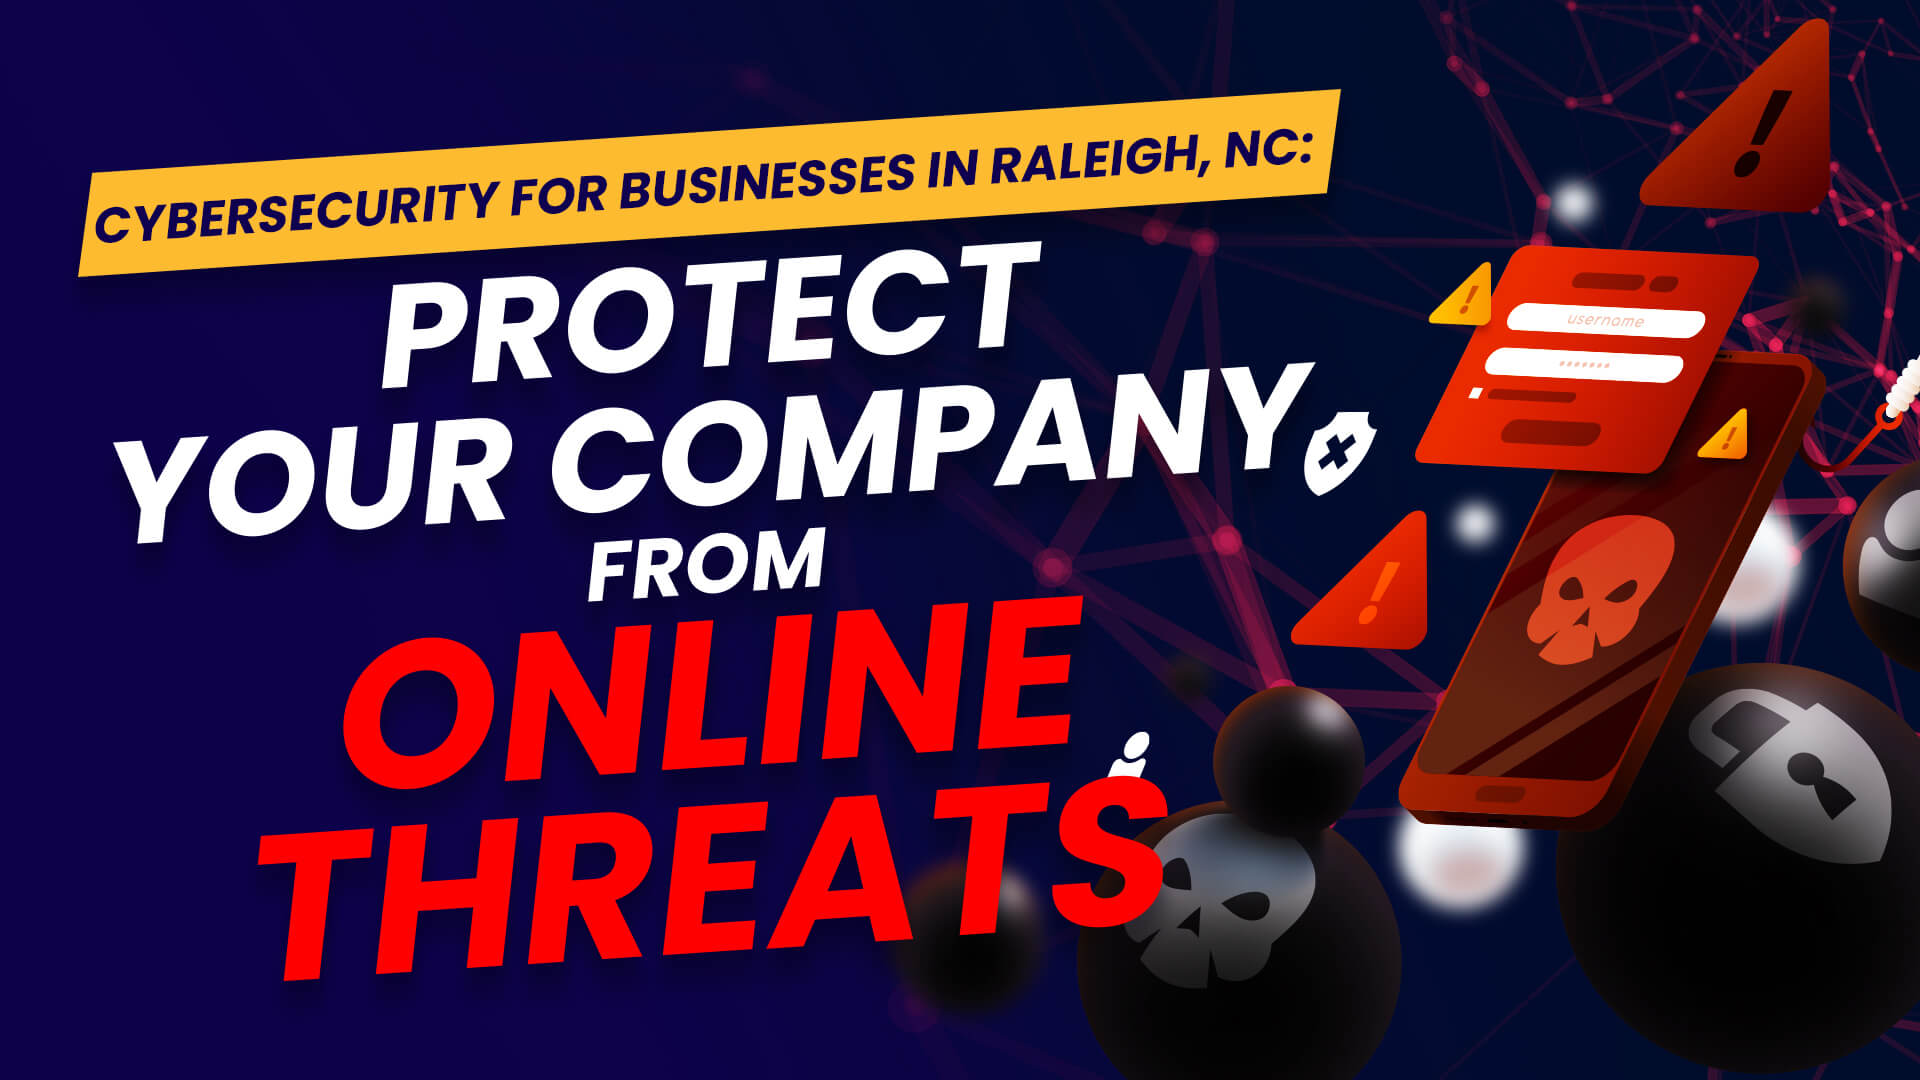 Cybersecurity for Businesses in Raleigh, NC: Protect Your Company from Online Threats